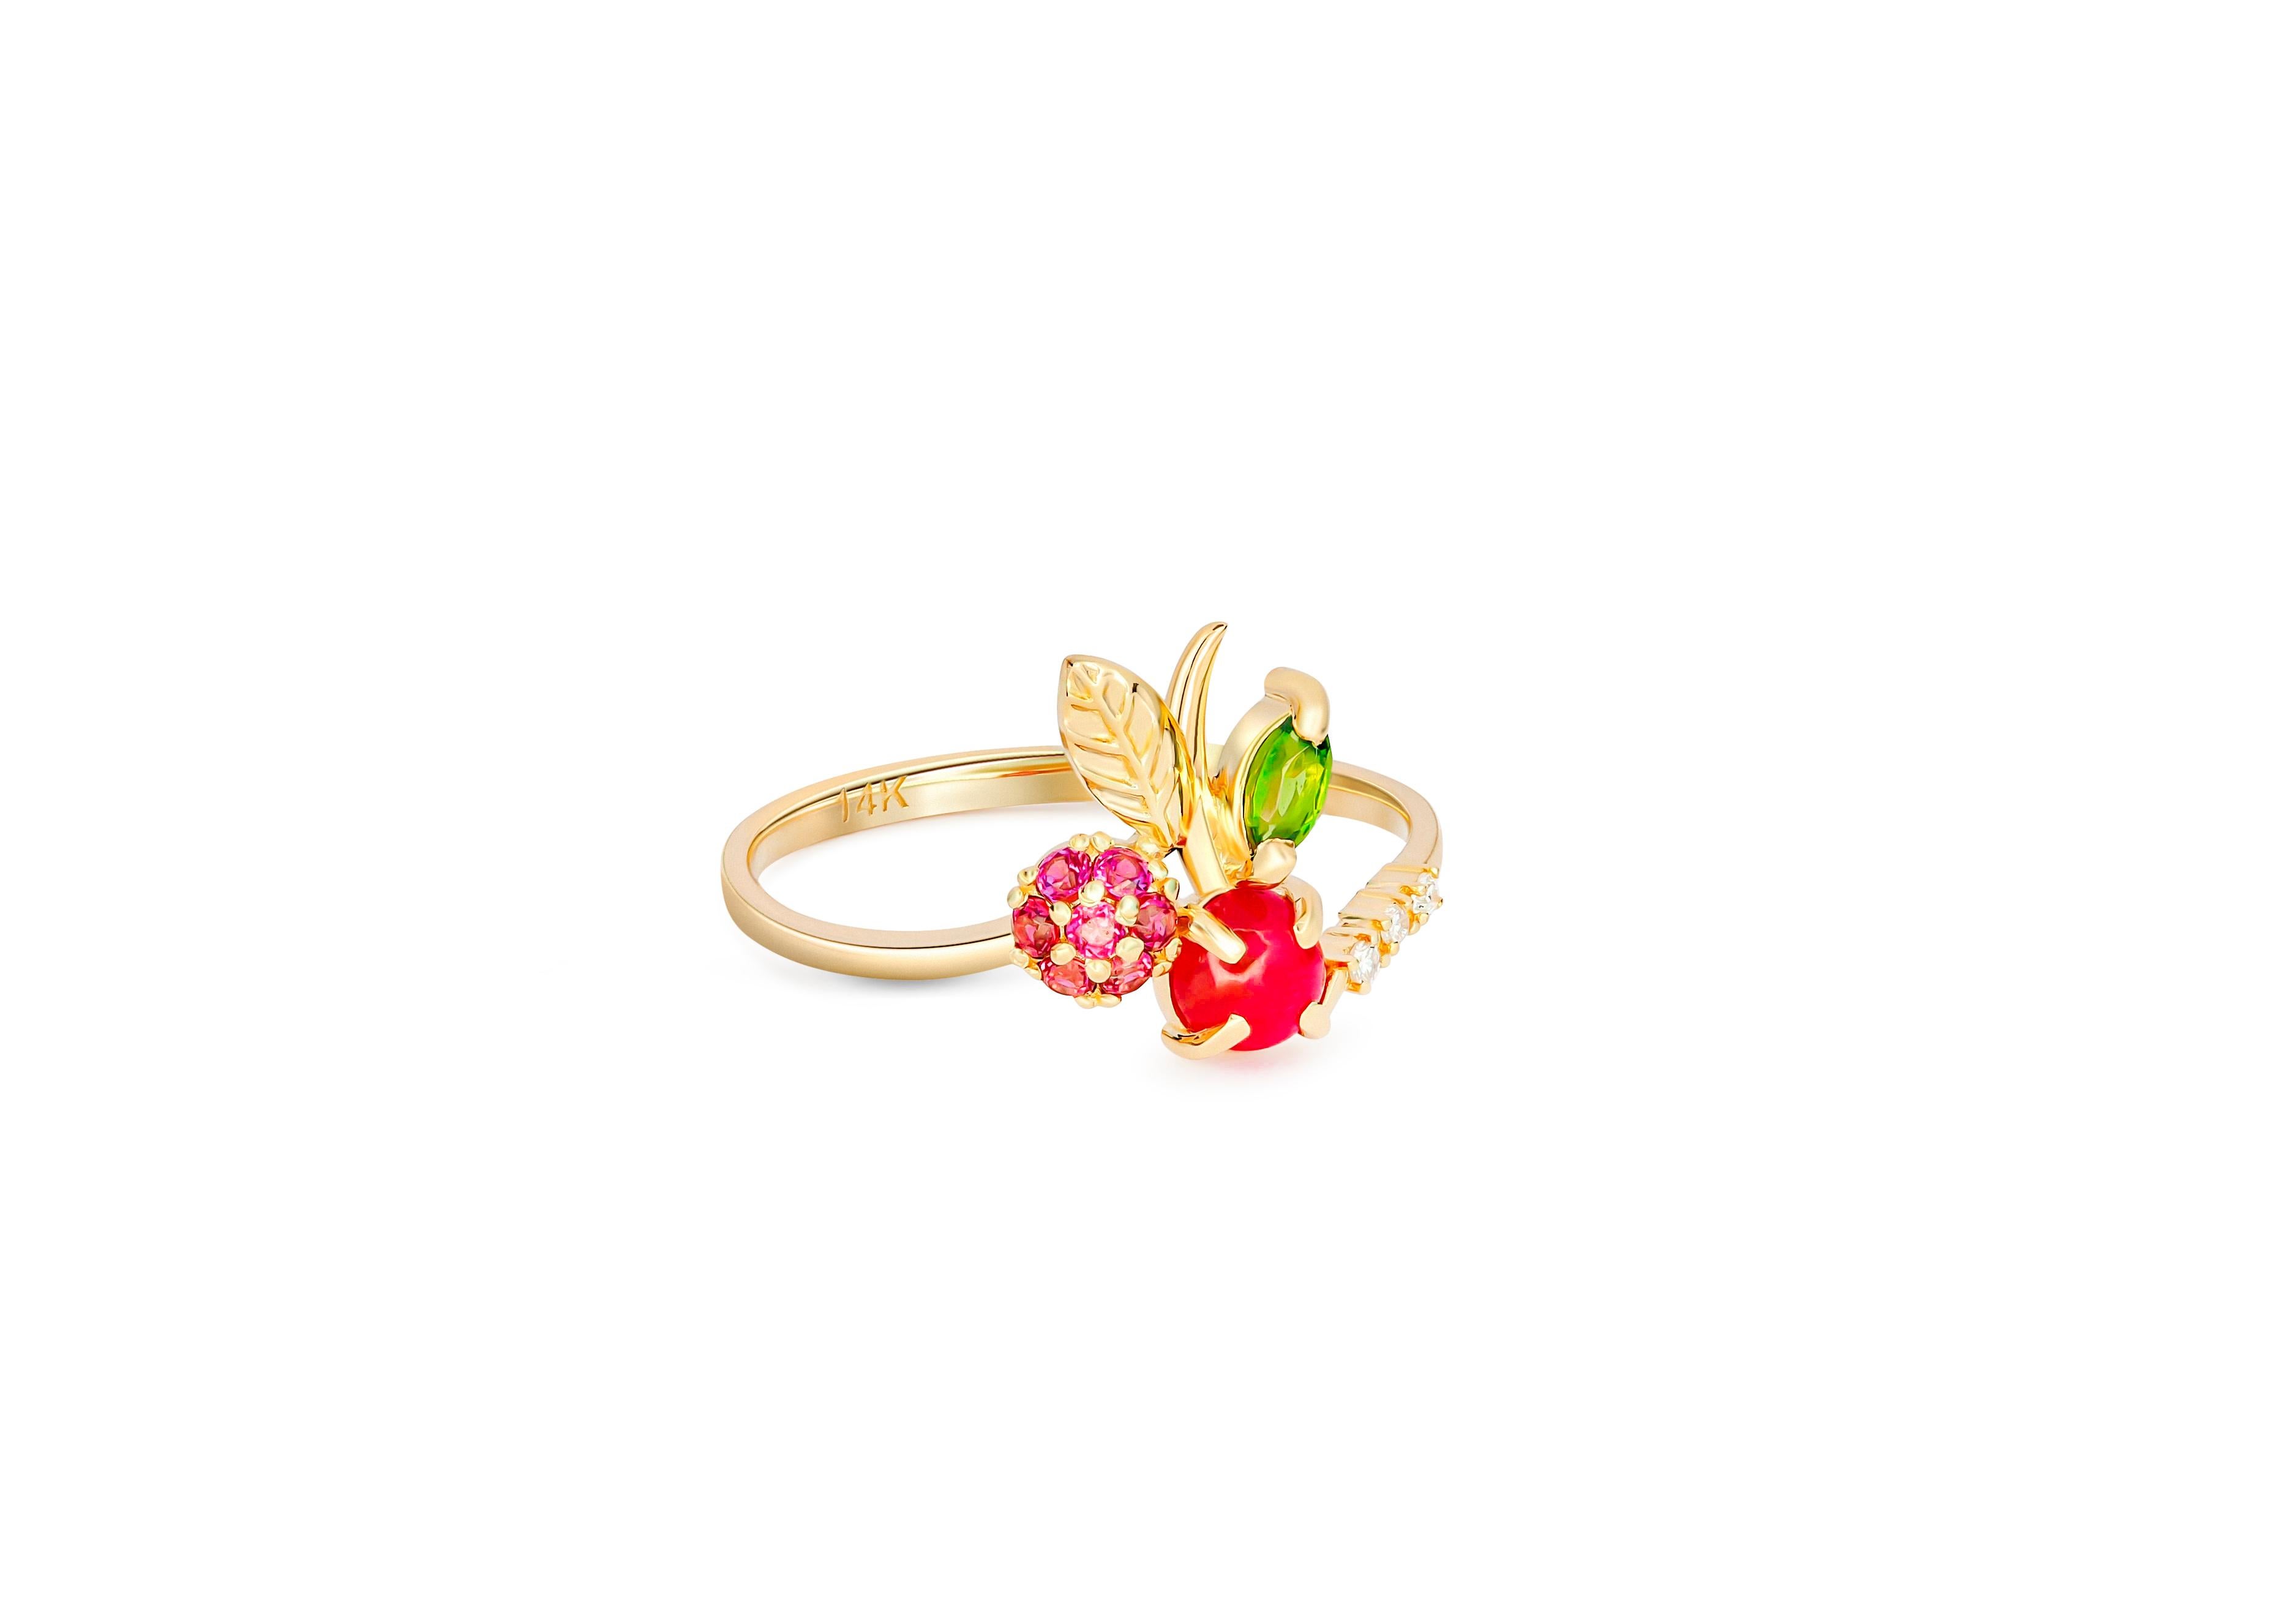 Gold Cherry ruby ring. 
Cabochon Ruby 14k gold ring. Berry gold ring. Gold Leaves ring. July birthstone ring. Summer ring. Gift for Daughter.

Metal: 14k gold
Weight: 1.65 g. depends from size.

Ruby: color - red
Round cabochon cut, 0.55 ct.